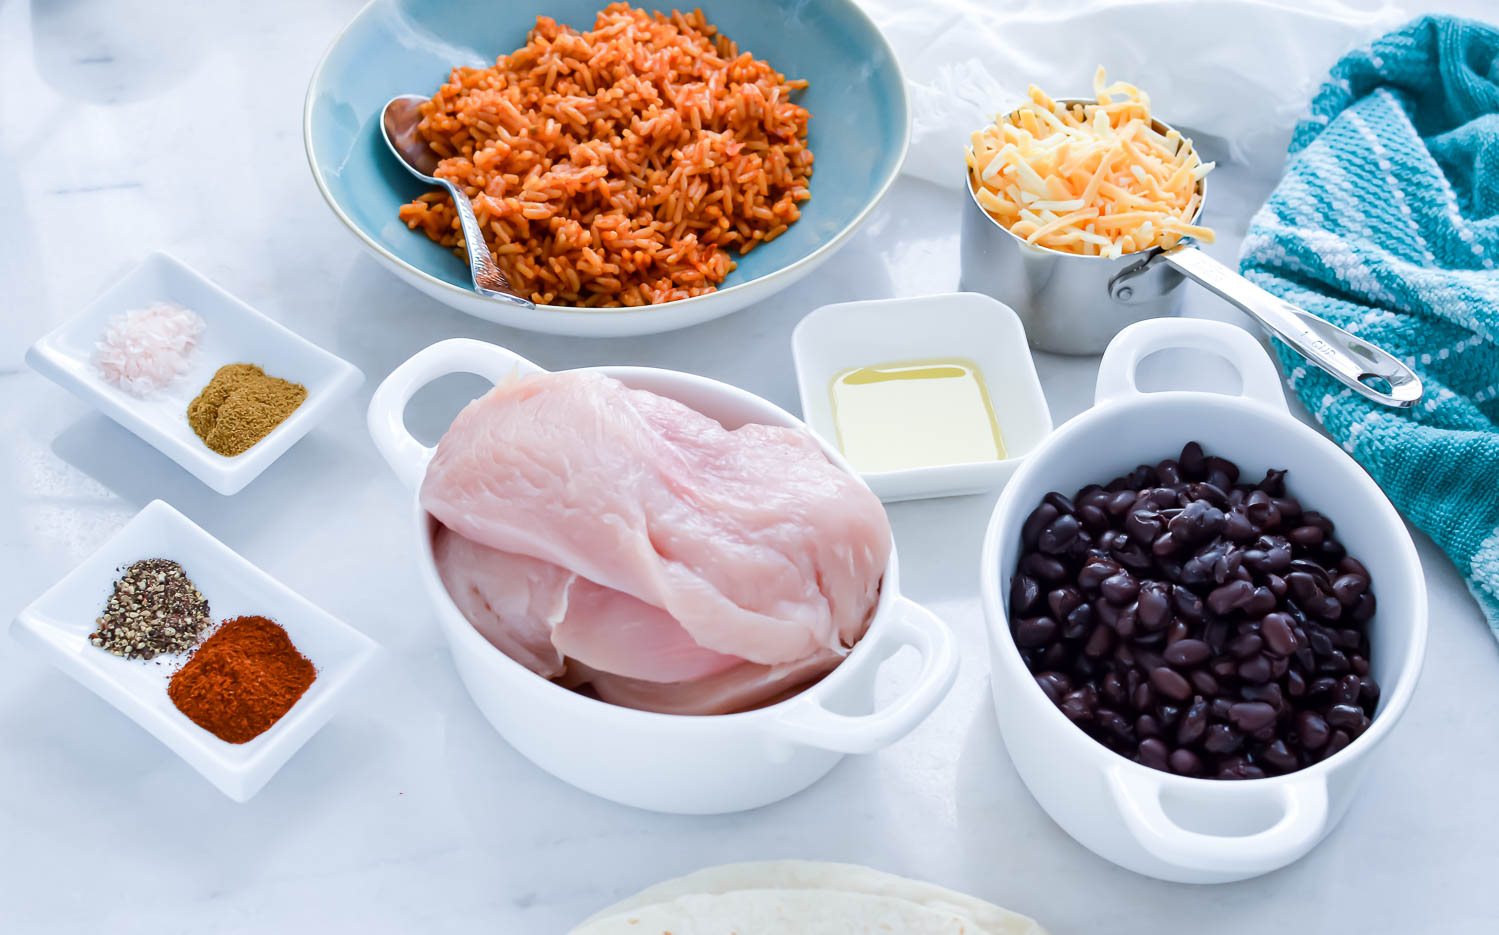 Easy Chicken Burrito recipe ingredients in  separate containers, spices, butter, Spanish rice, cheese, chicken and beans.